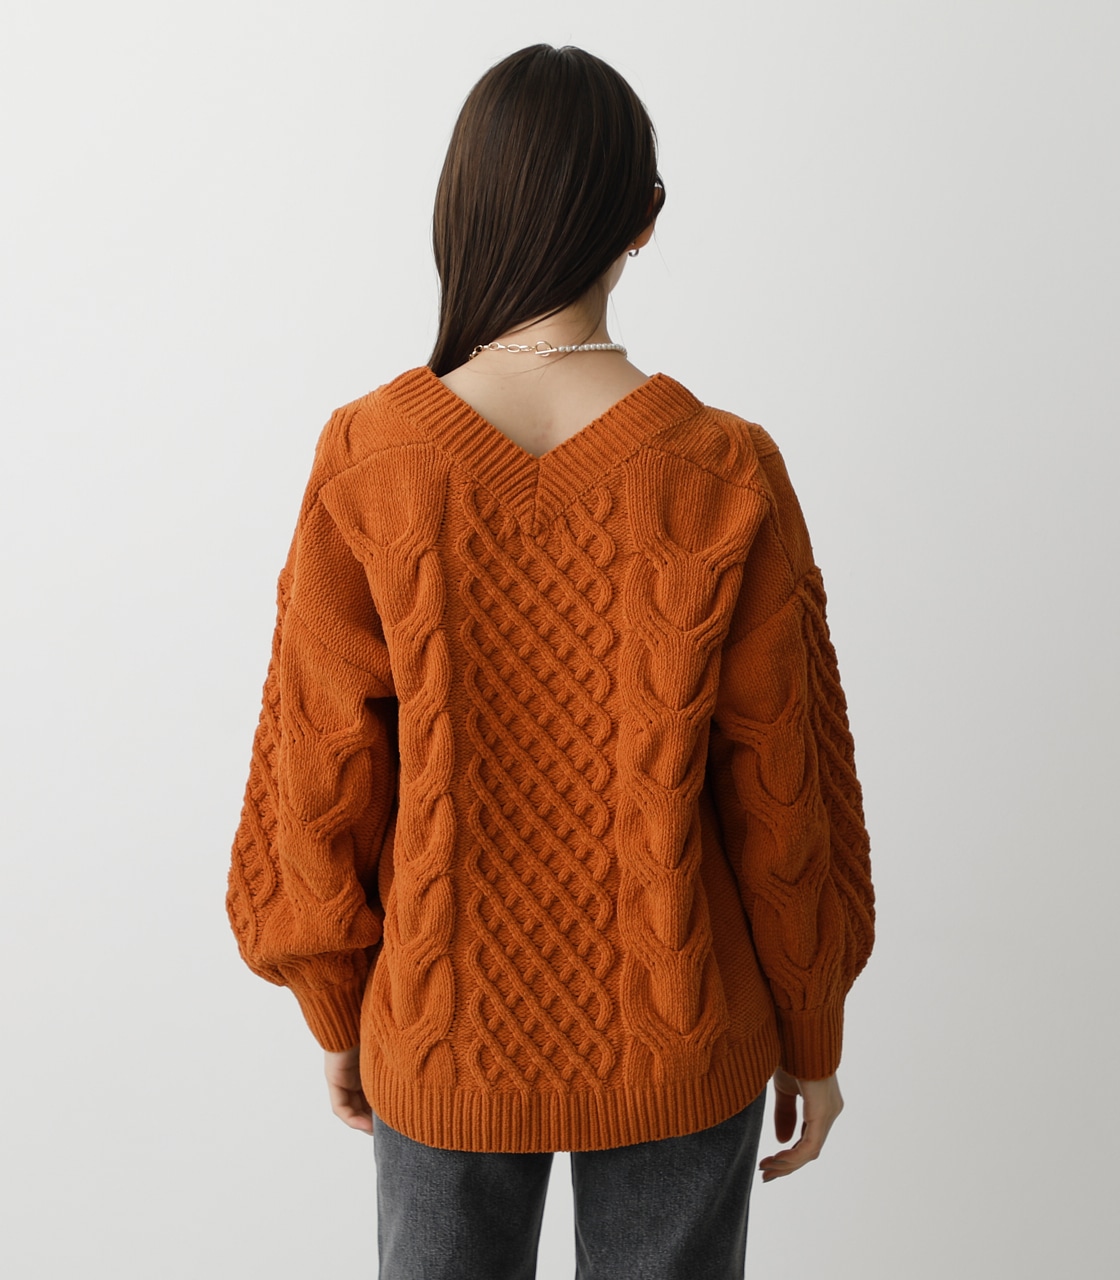 CHENILLE CABLE V/N KNIT TOPS/シェニールケーブルVネックニットトップス 詳細画像 D/ORG 7